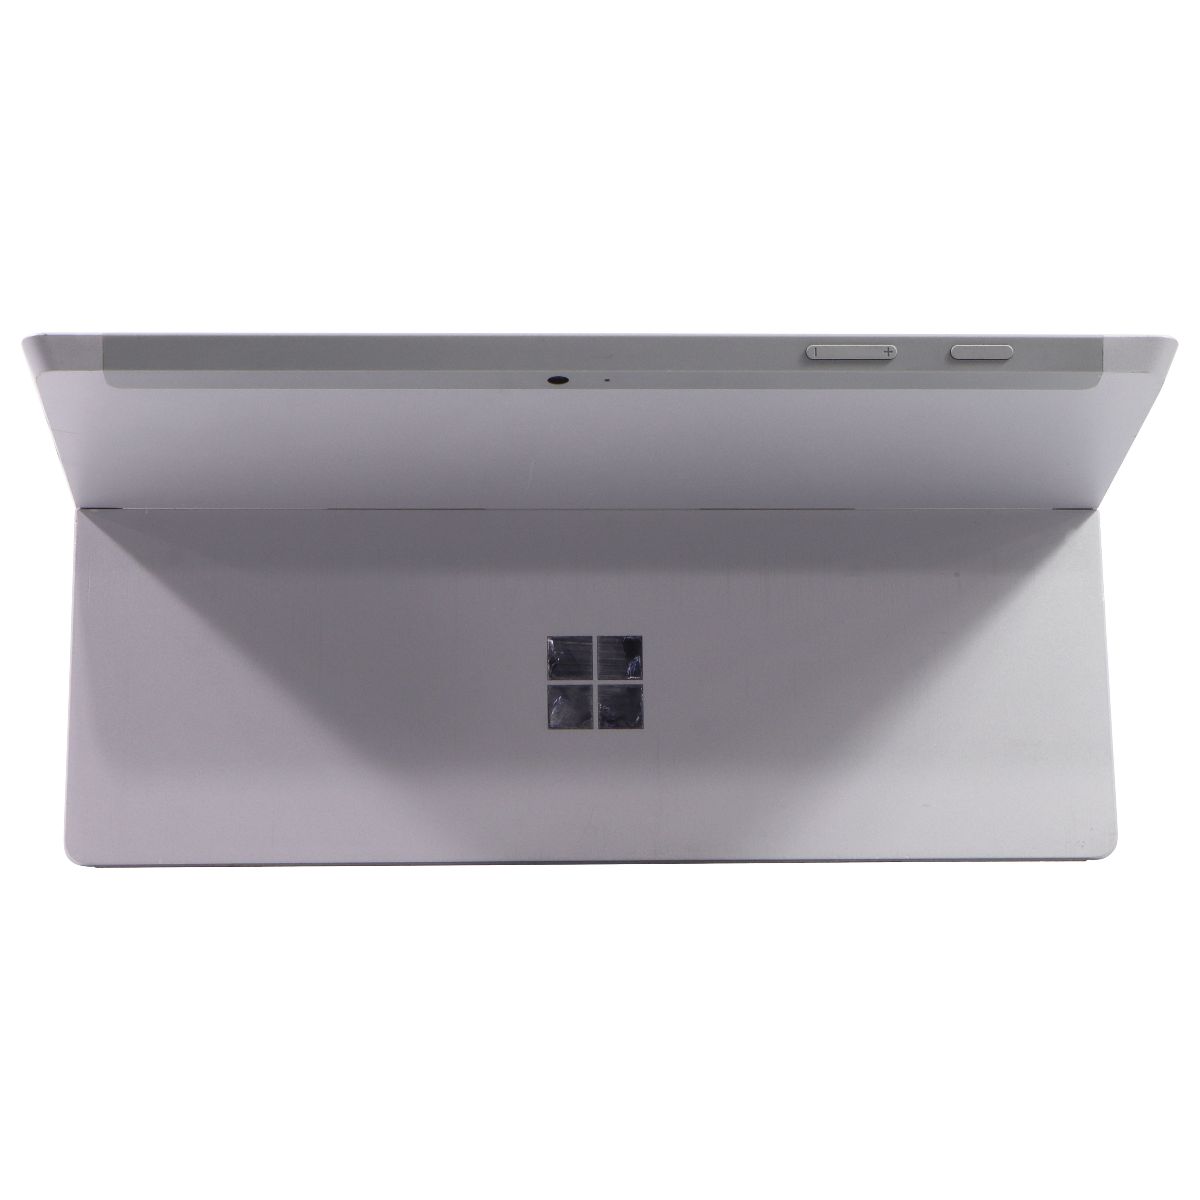 Microsoft Surface 3 (10.8-in) Wi-Fi Tablet 1657 Intel X7-8700/128GB/4GB/10 Home Laptops - PC Laptops & Netbooks Microsoft    - Simple Cell Bulk Wholesale Pricing - USA Seller